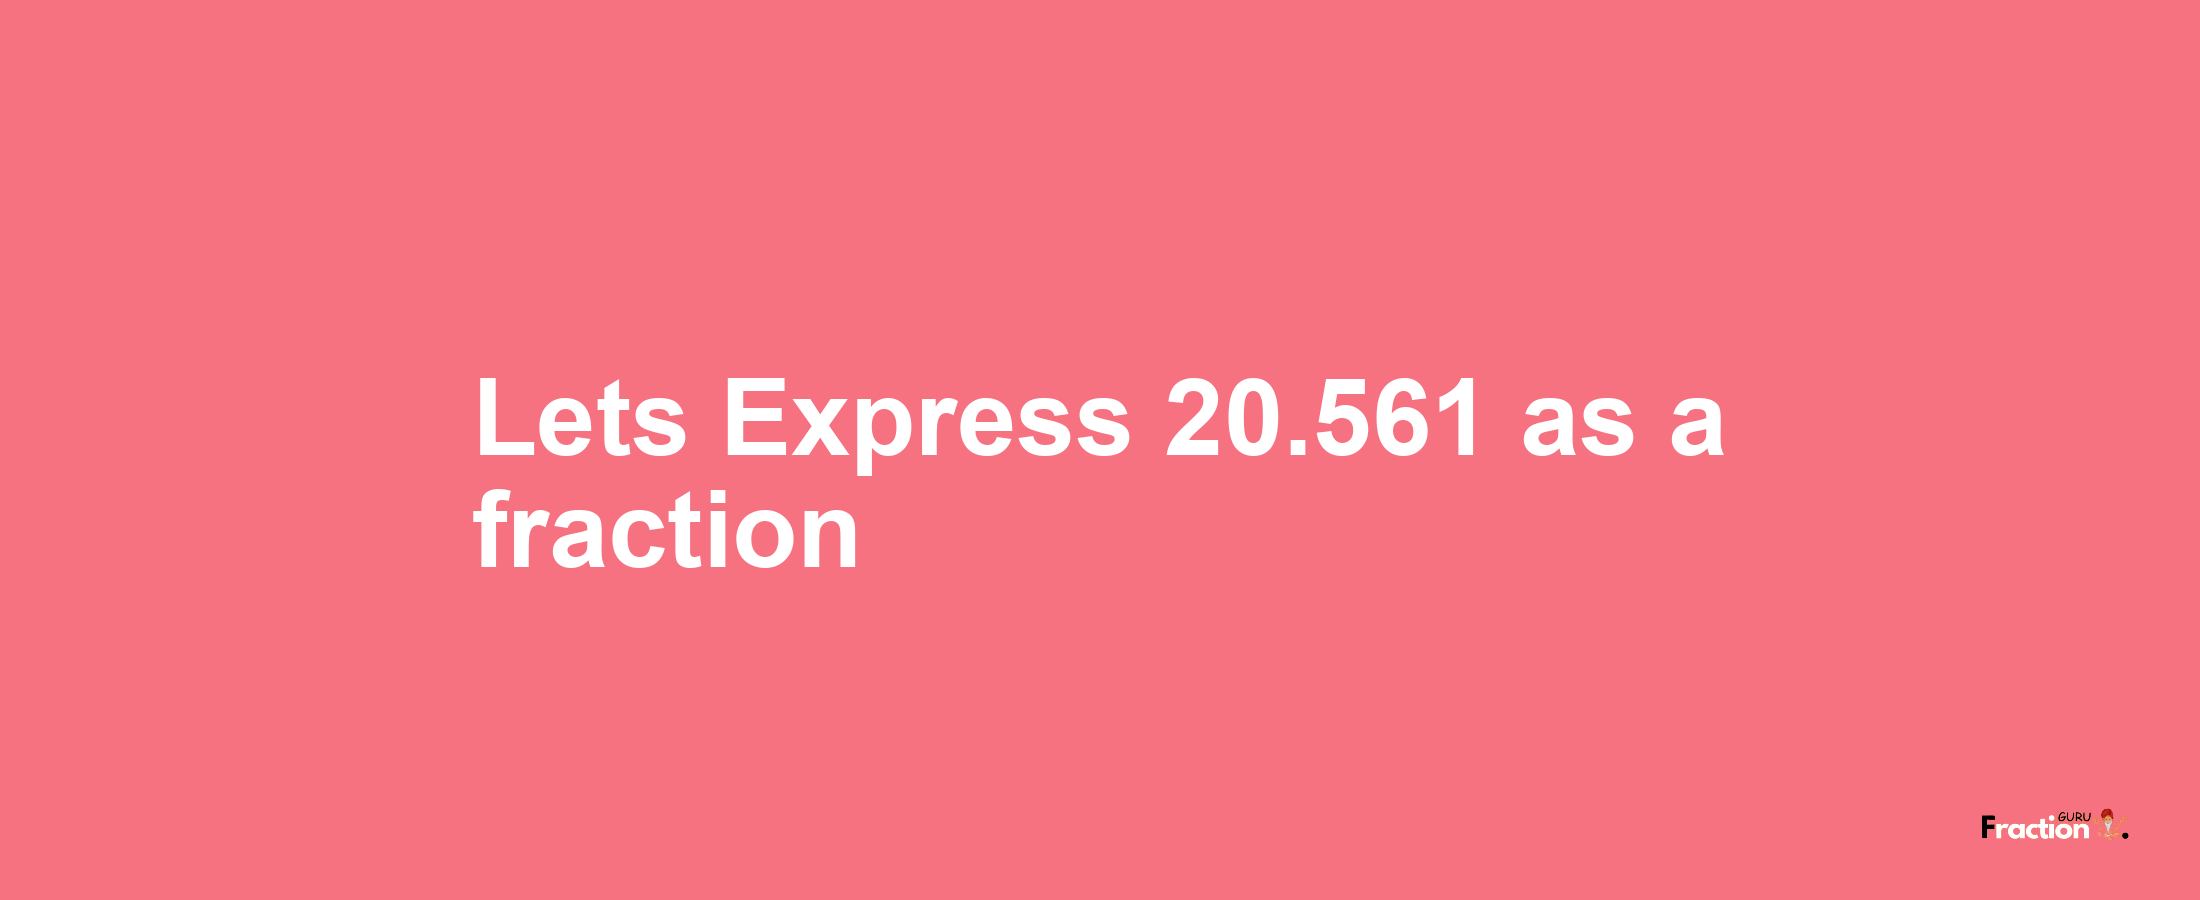 Lets Express 20.561 as afraction